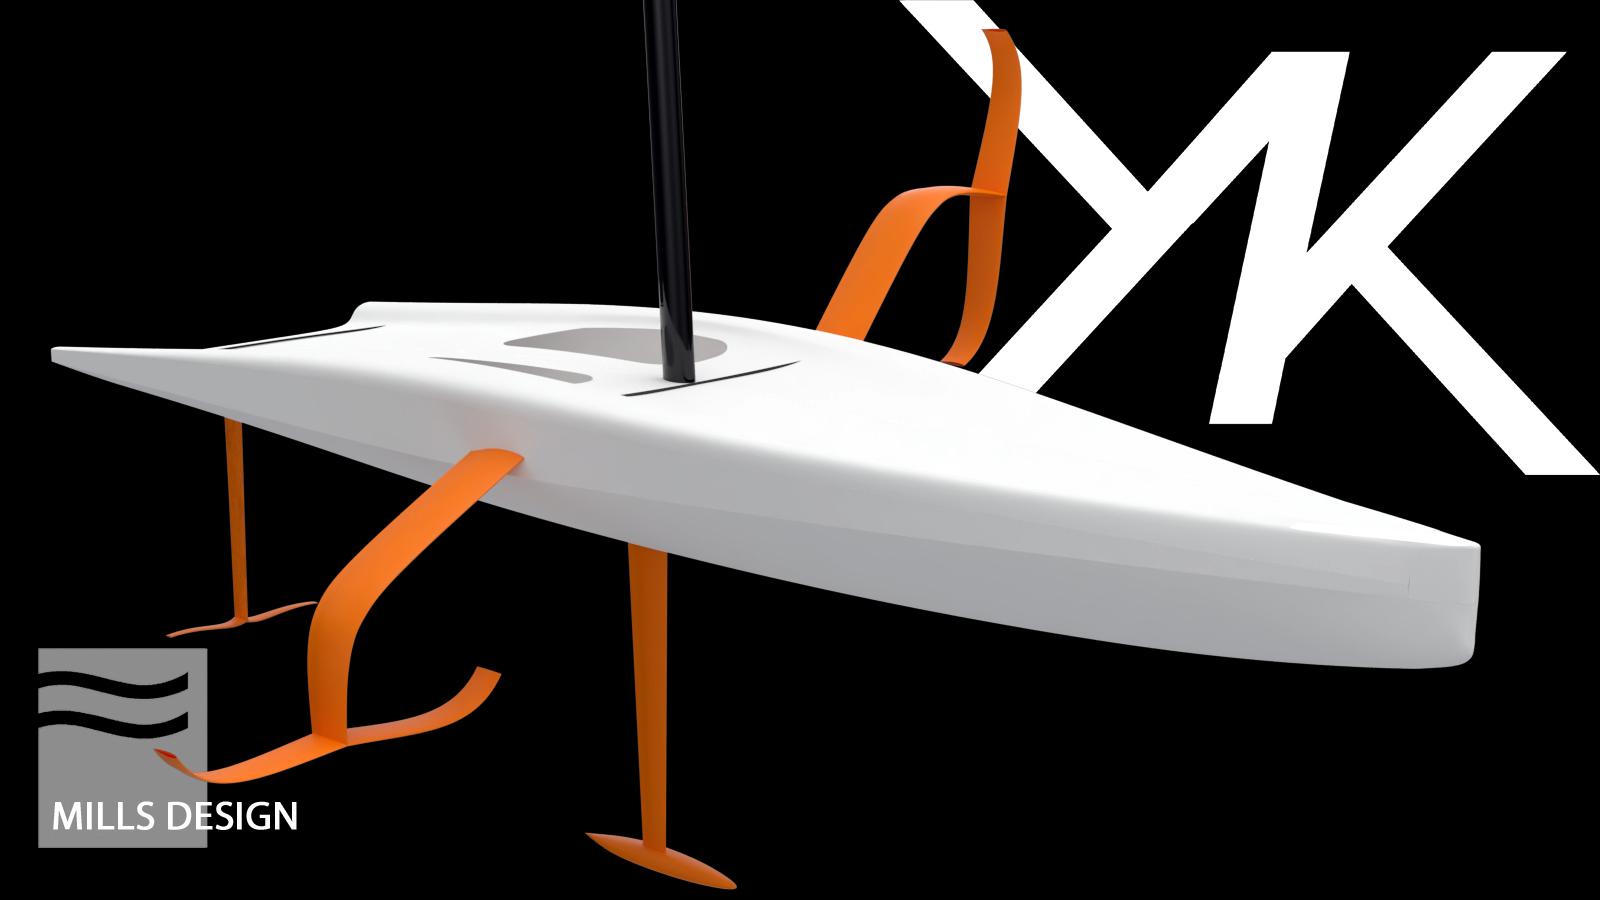 The most exciting new design project outside of the America’s Cup